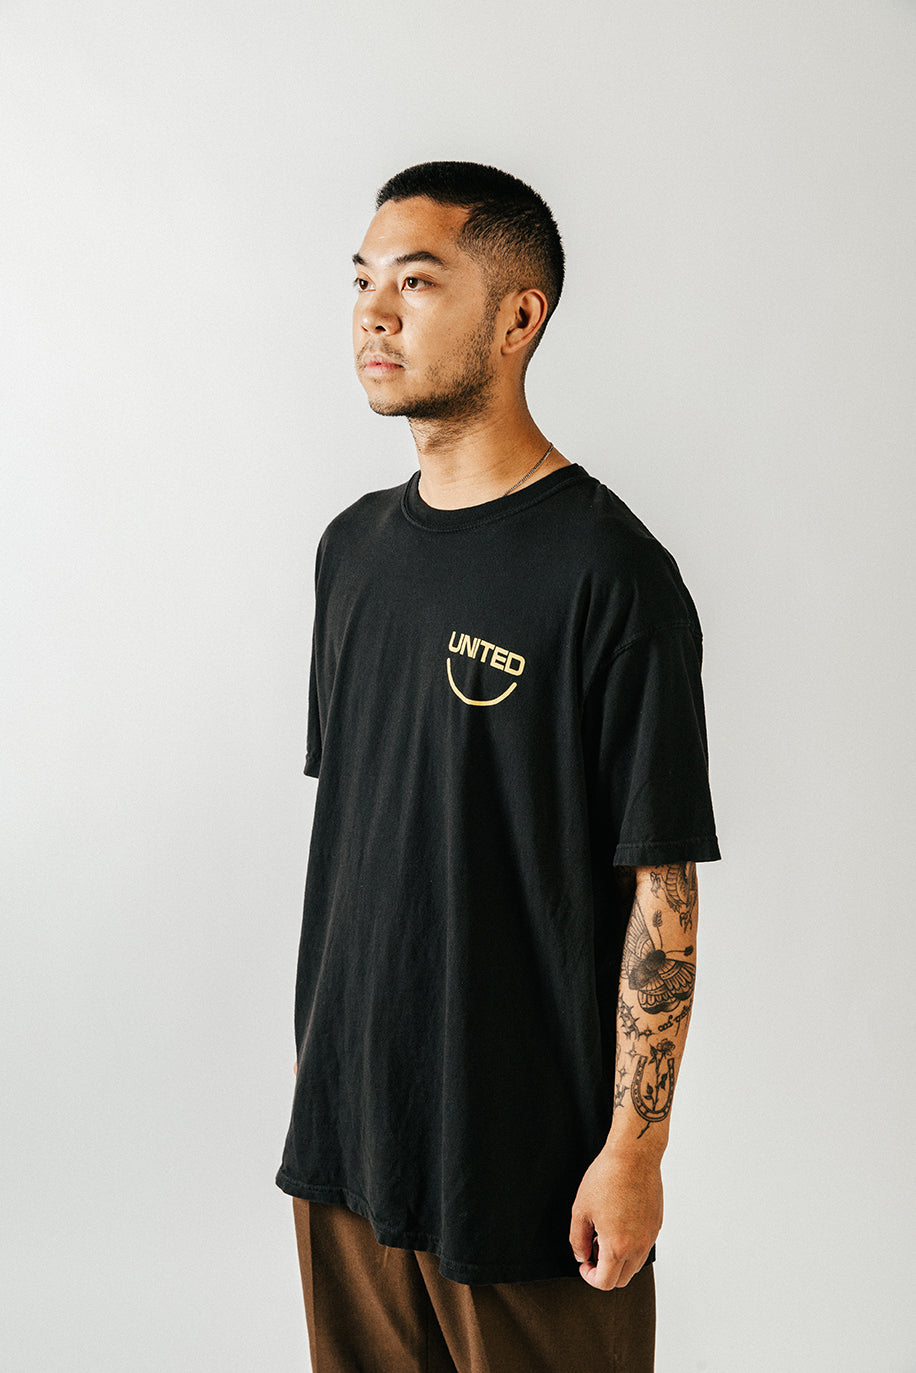 Bed Rock Fools Club T-Shirt – HILLSONG RESOURCES